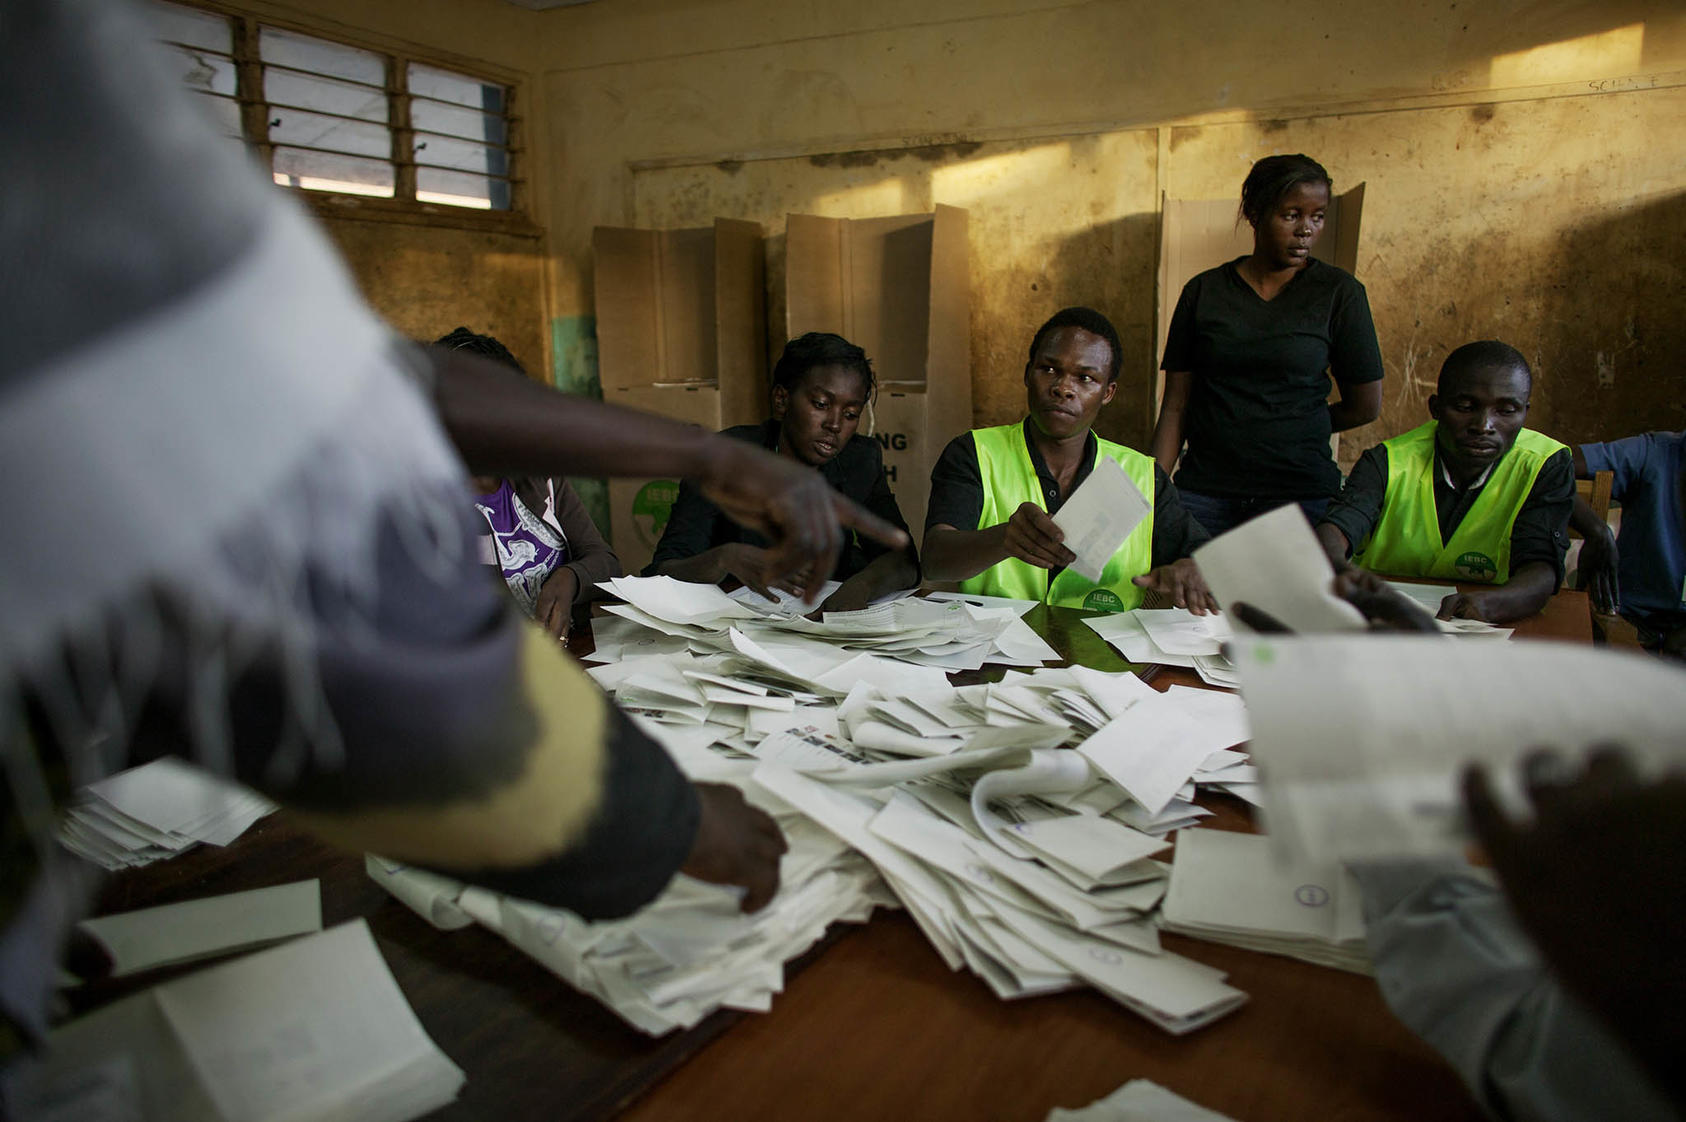 Poll workers begin sorting and counting ballots at a polling station in downtown Nairobi, Kenya, March 4, 2013. (Pete Muller/The New York Times)